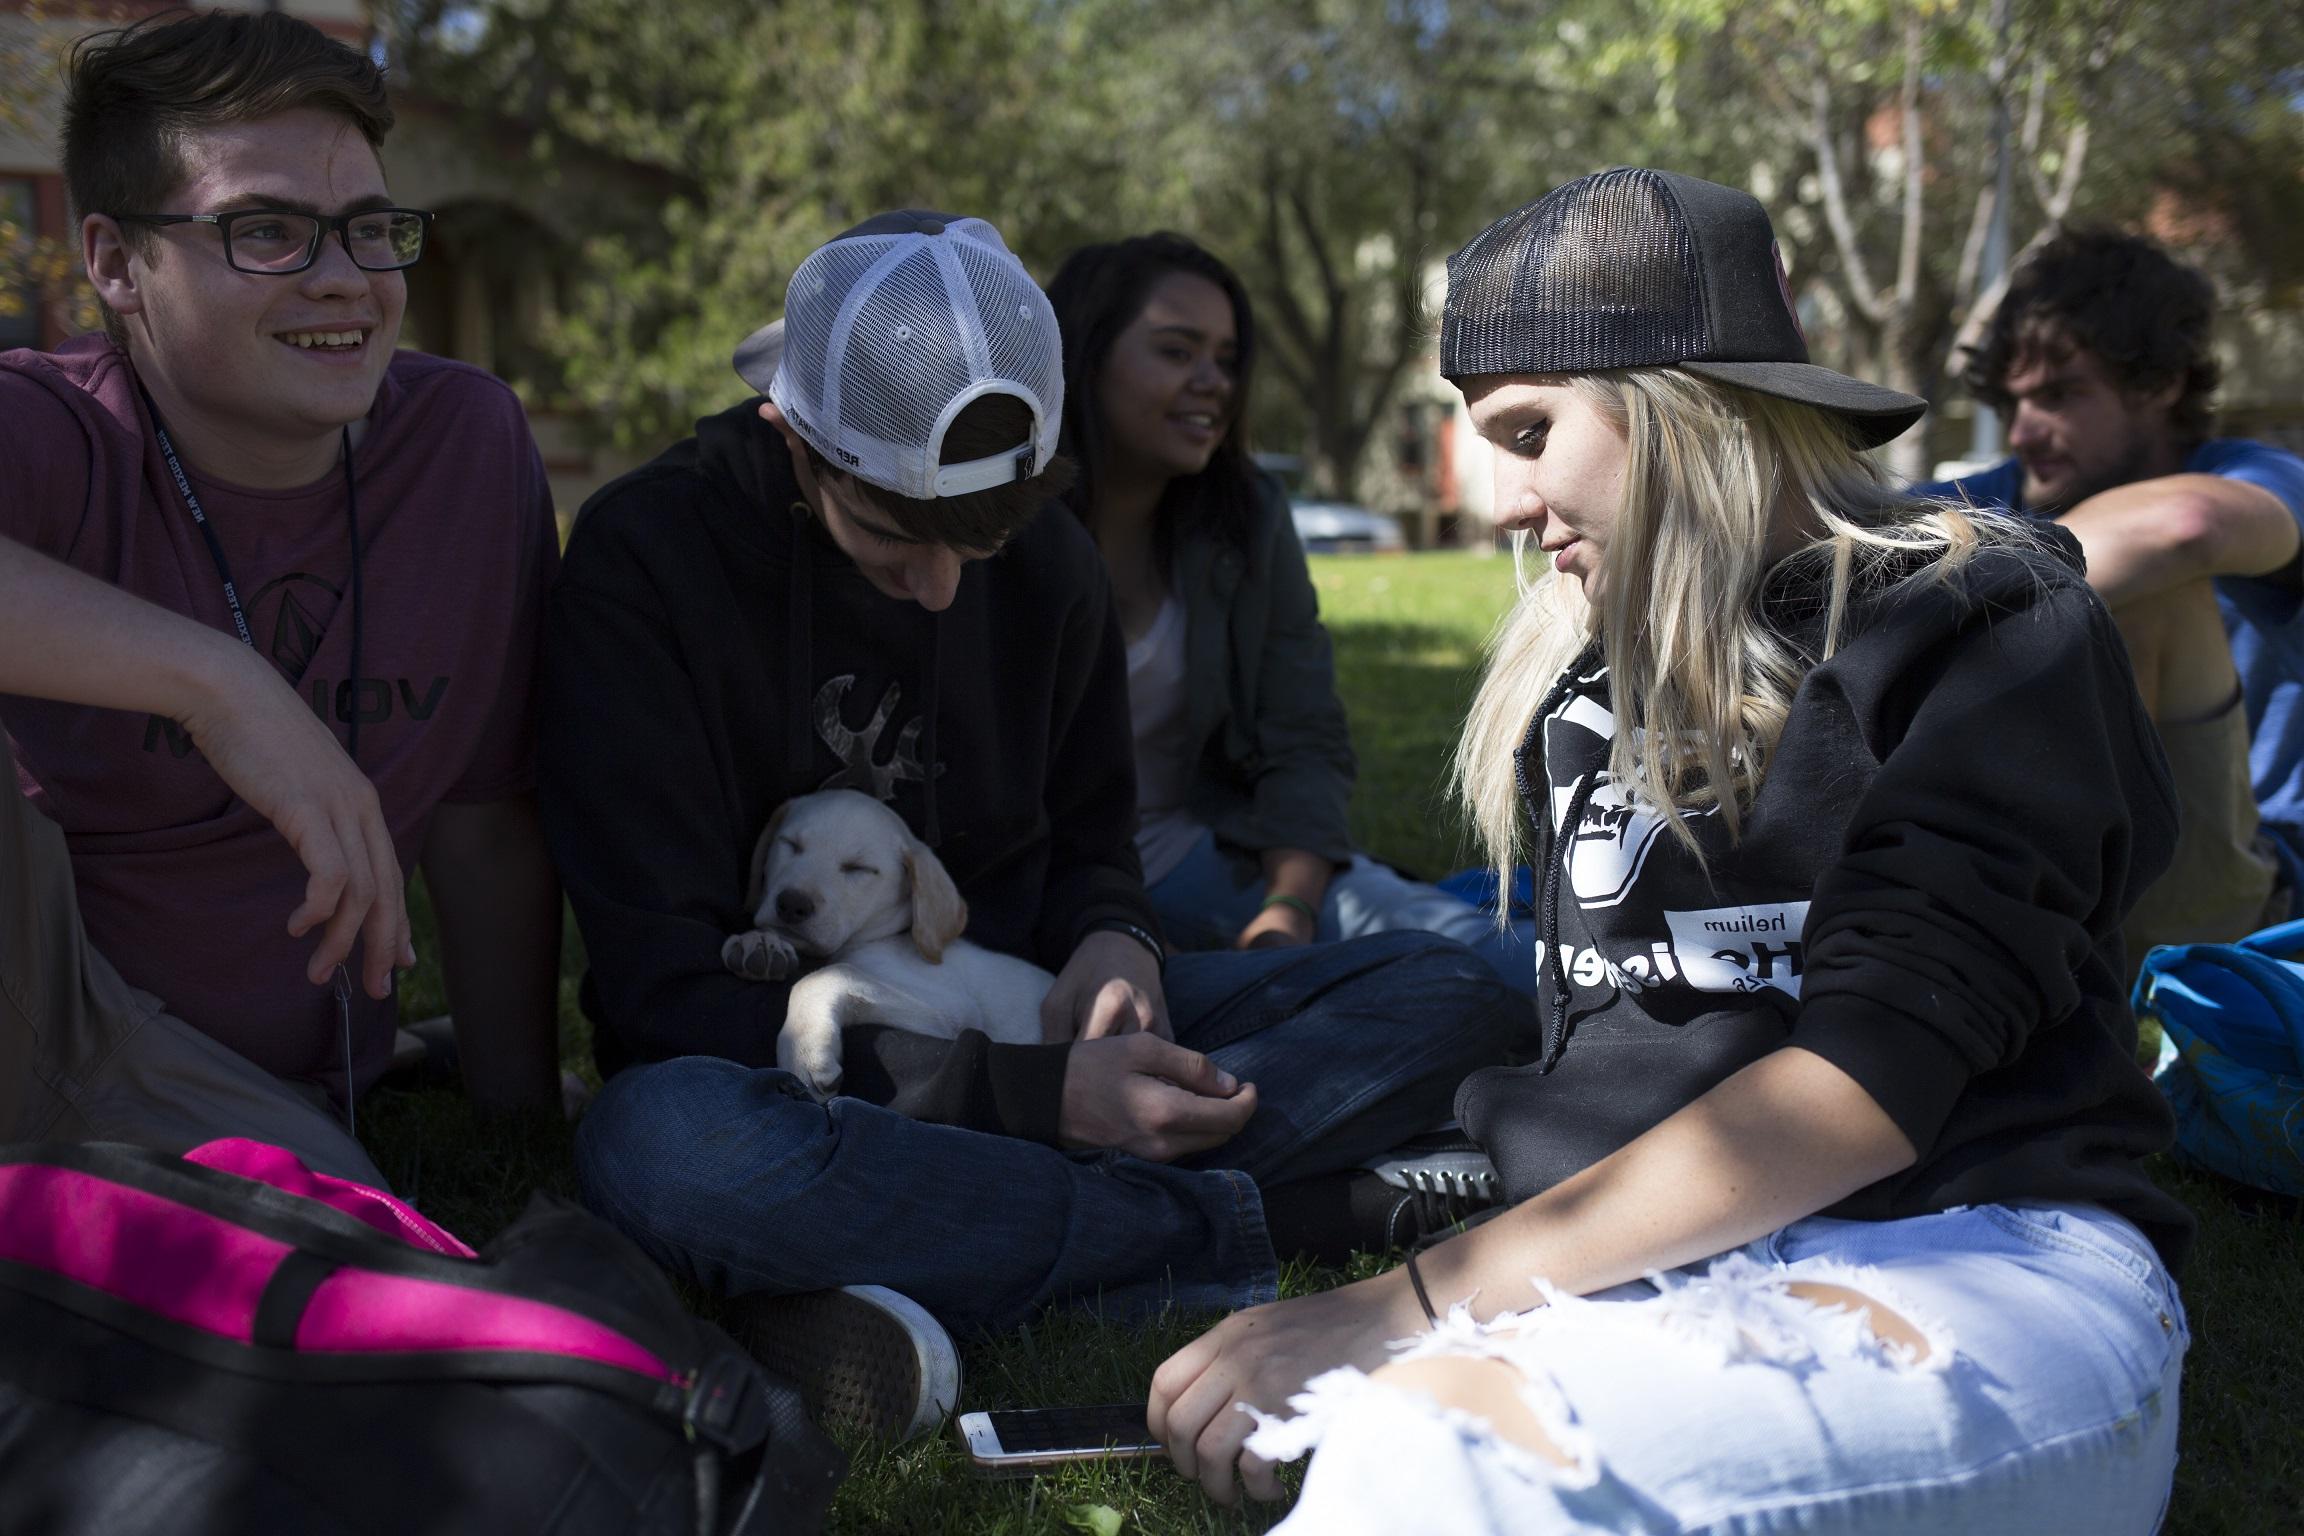 A group of students socializing in a grass area outside of the gym on campus.